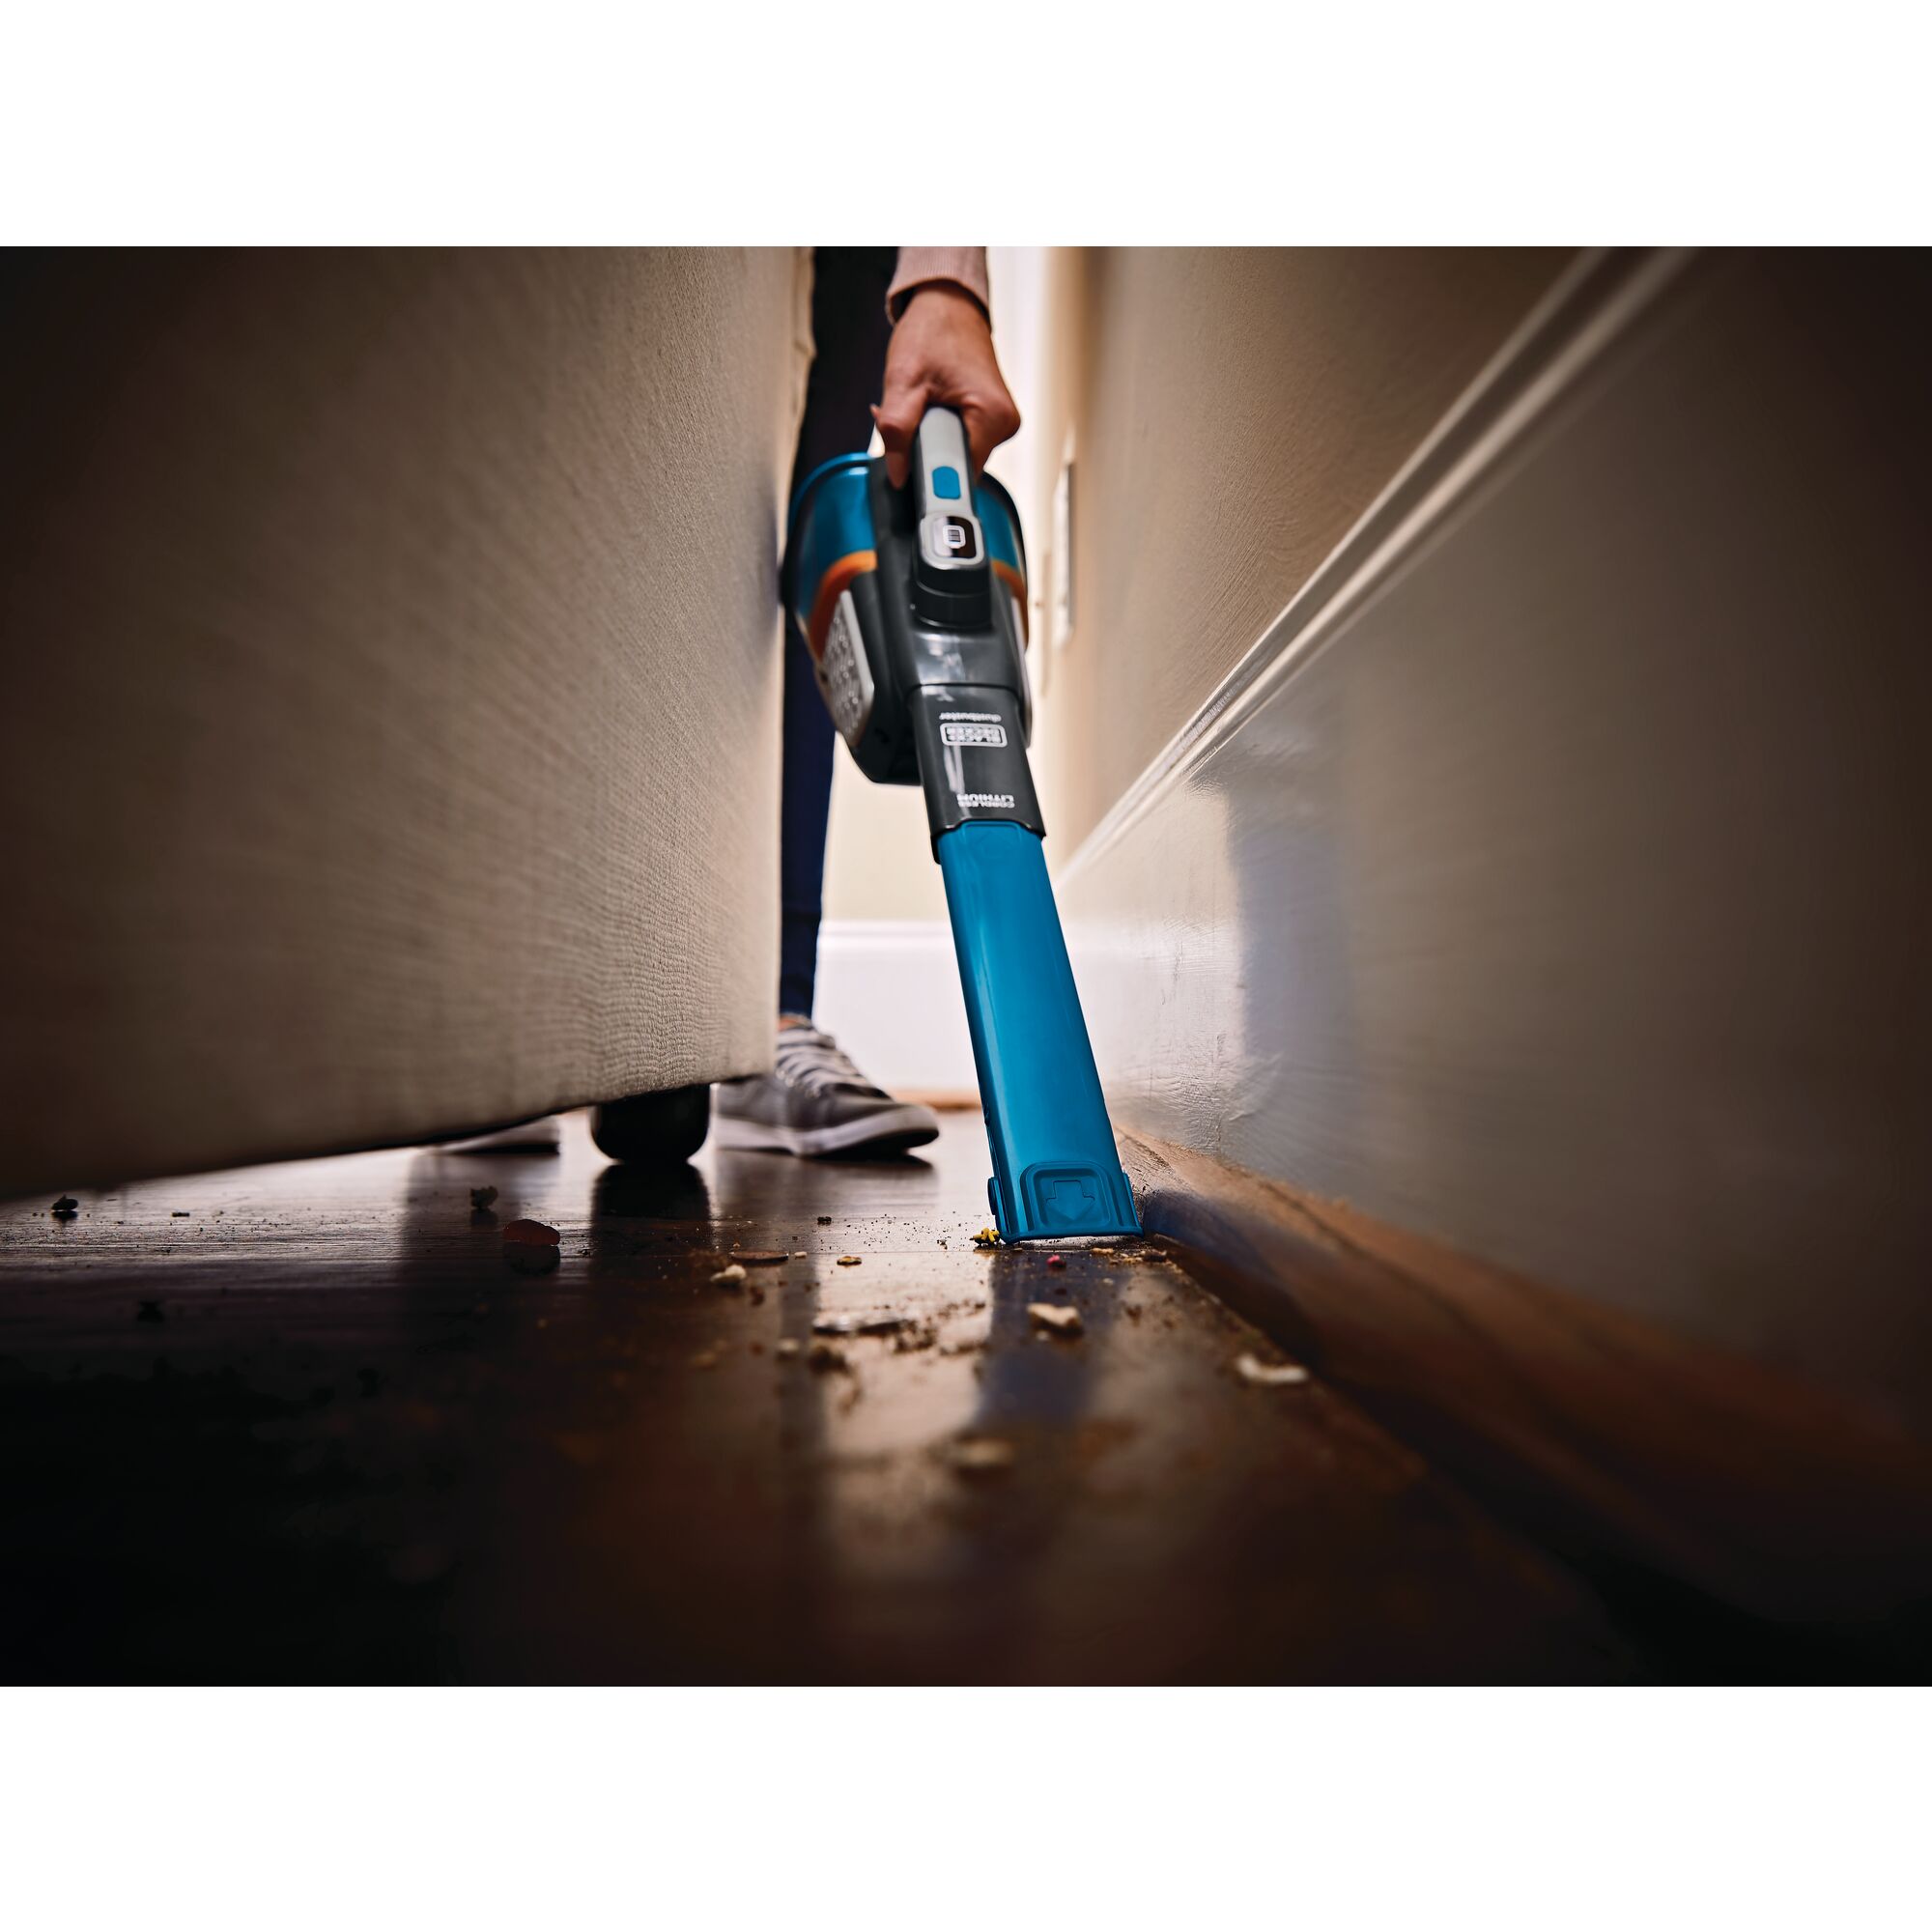 12 volt max dustbuster advancedclean cordless hand vacuum being used by a person.